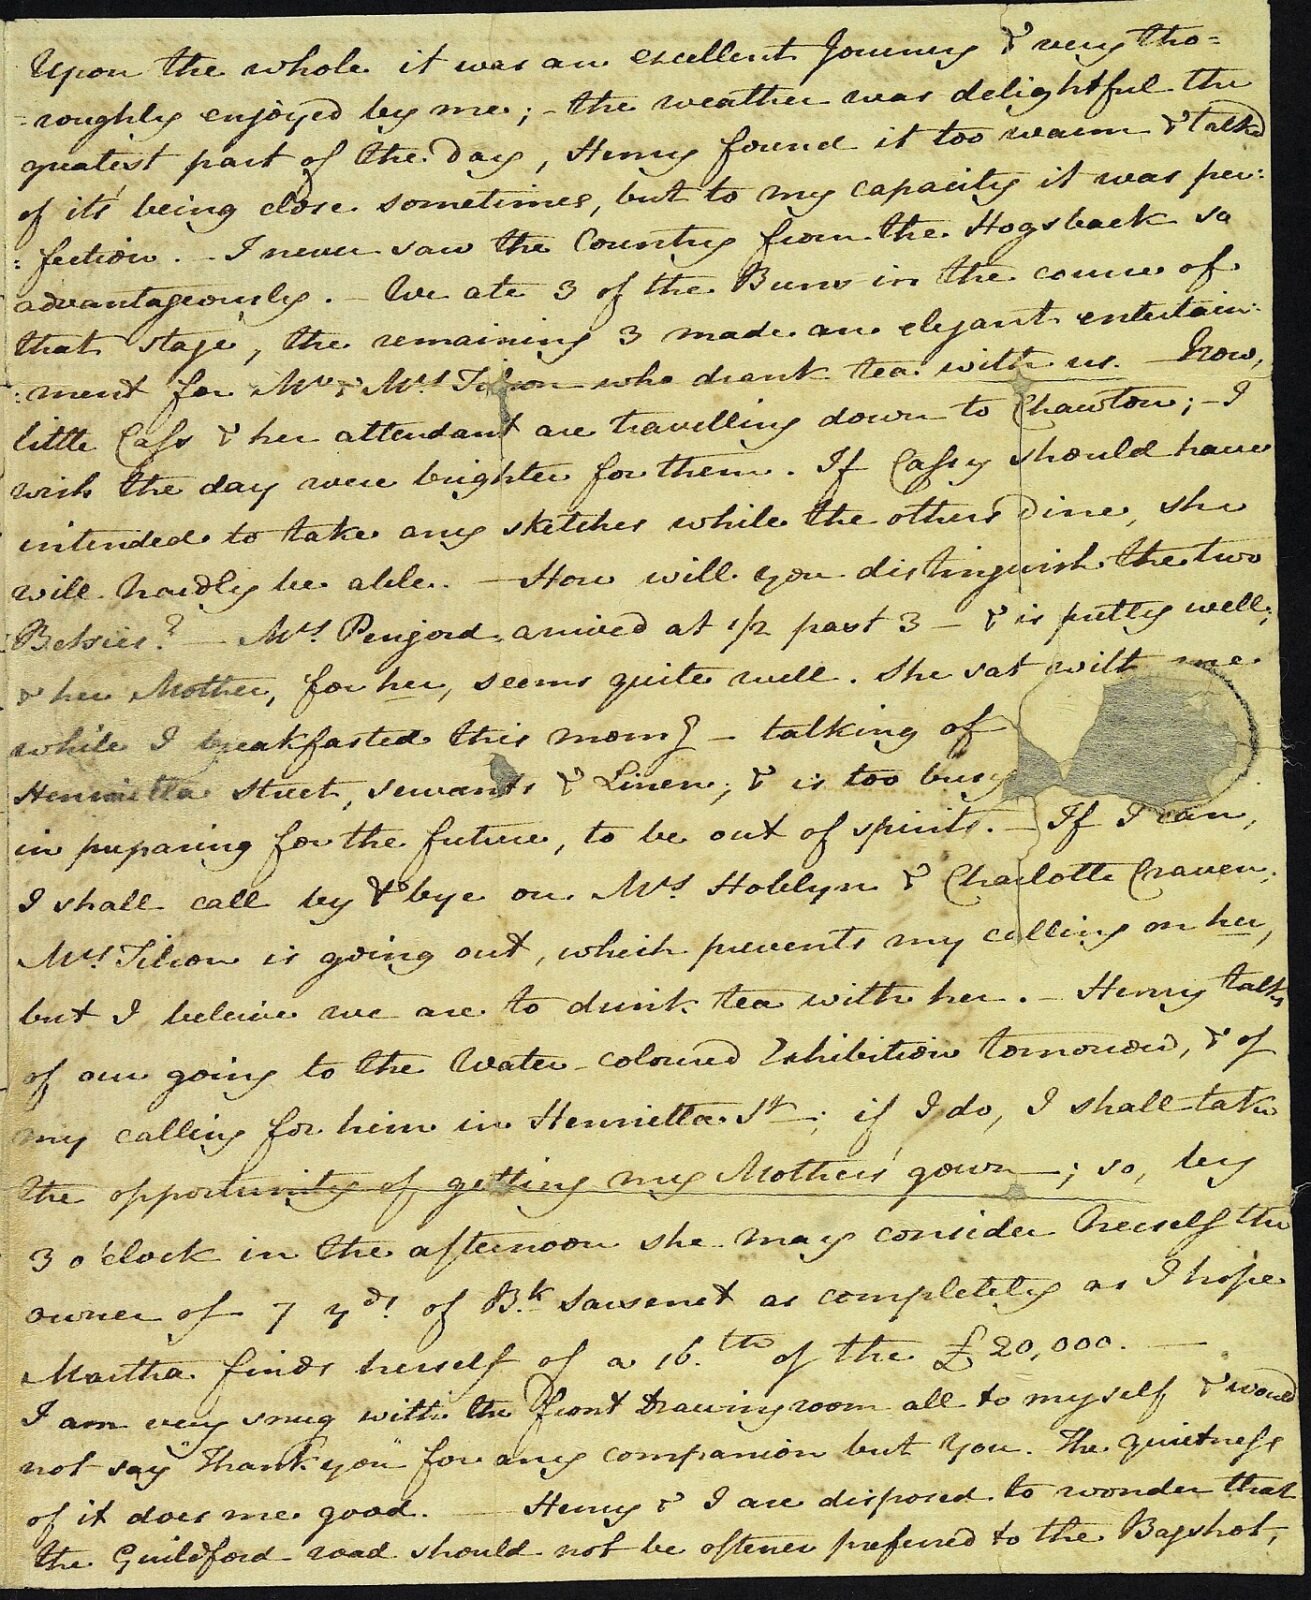 Letter from Jane Austen to Cassandra Austen, 20 May 1813, page 3